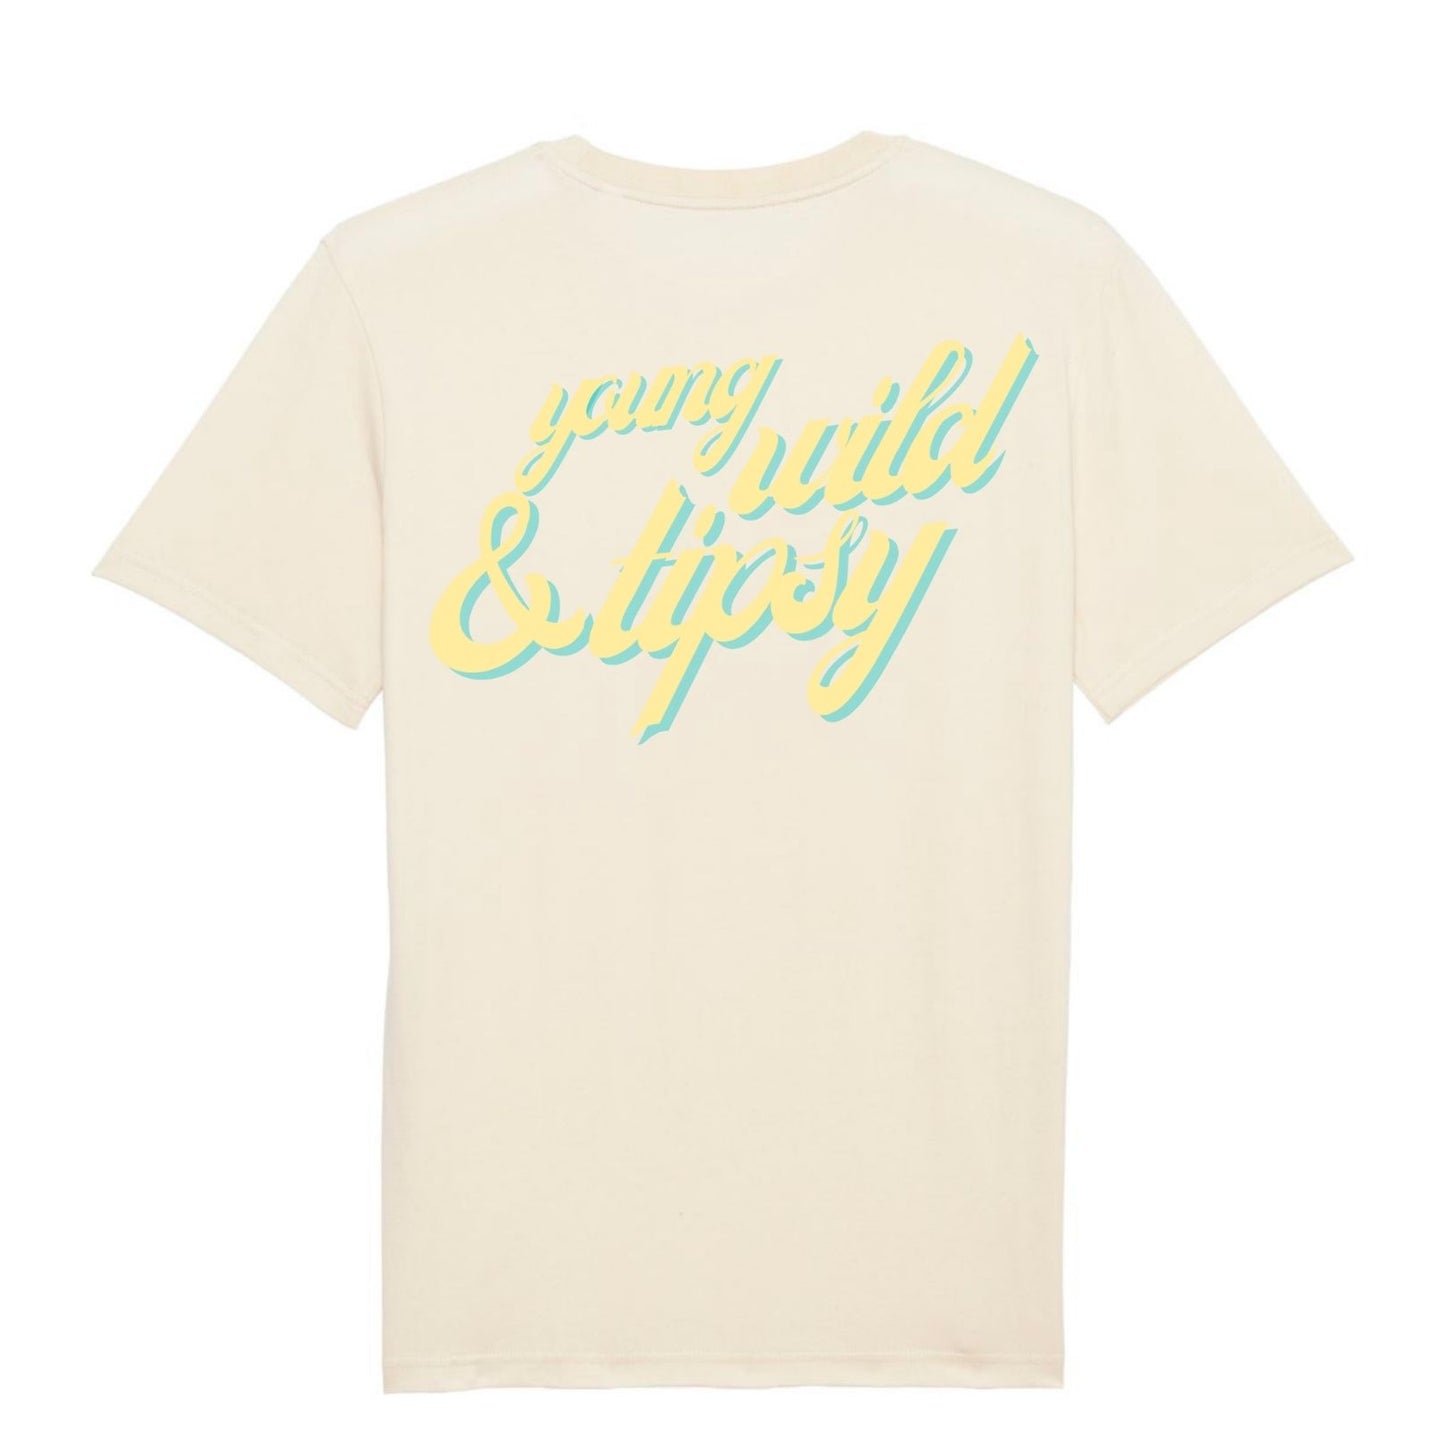 Young, wild and tipsy - Unisex Organic Shirt